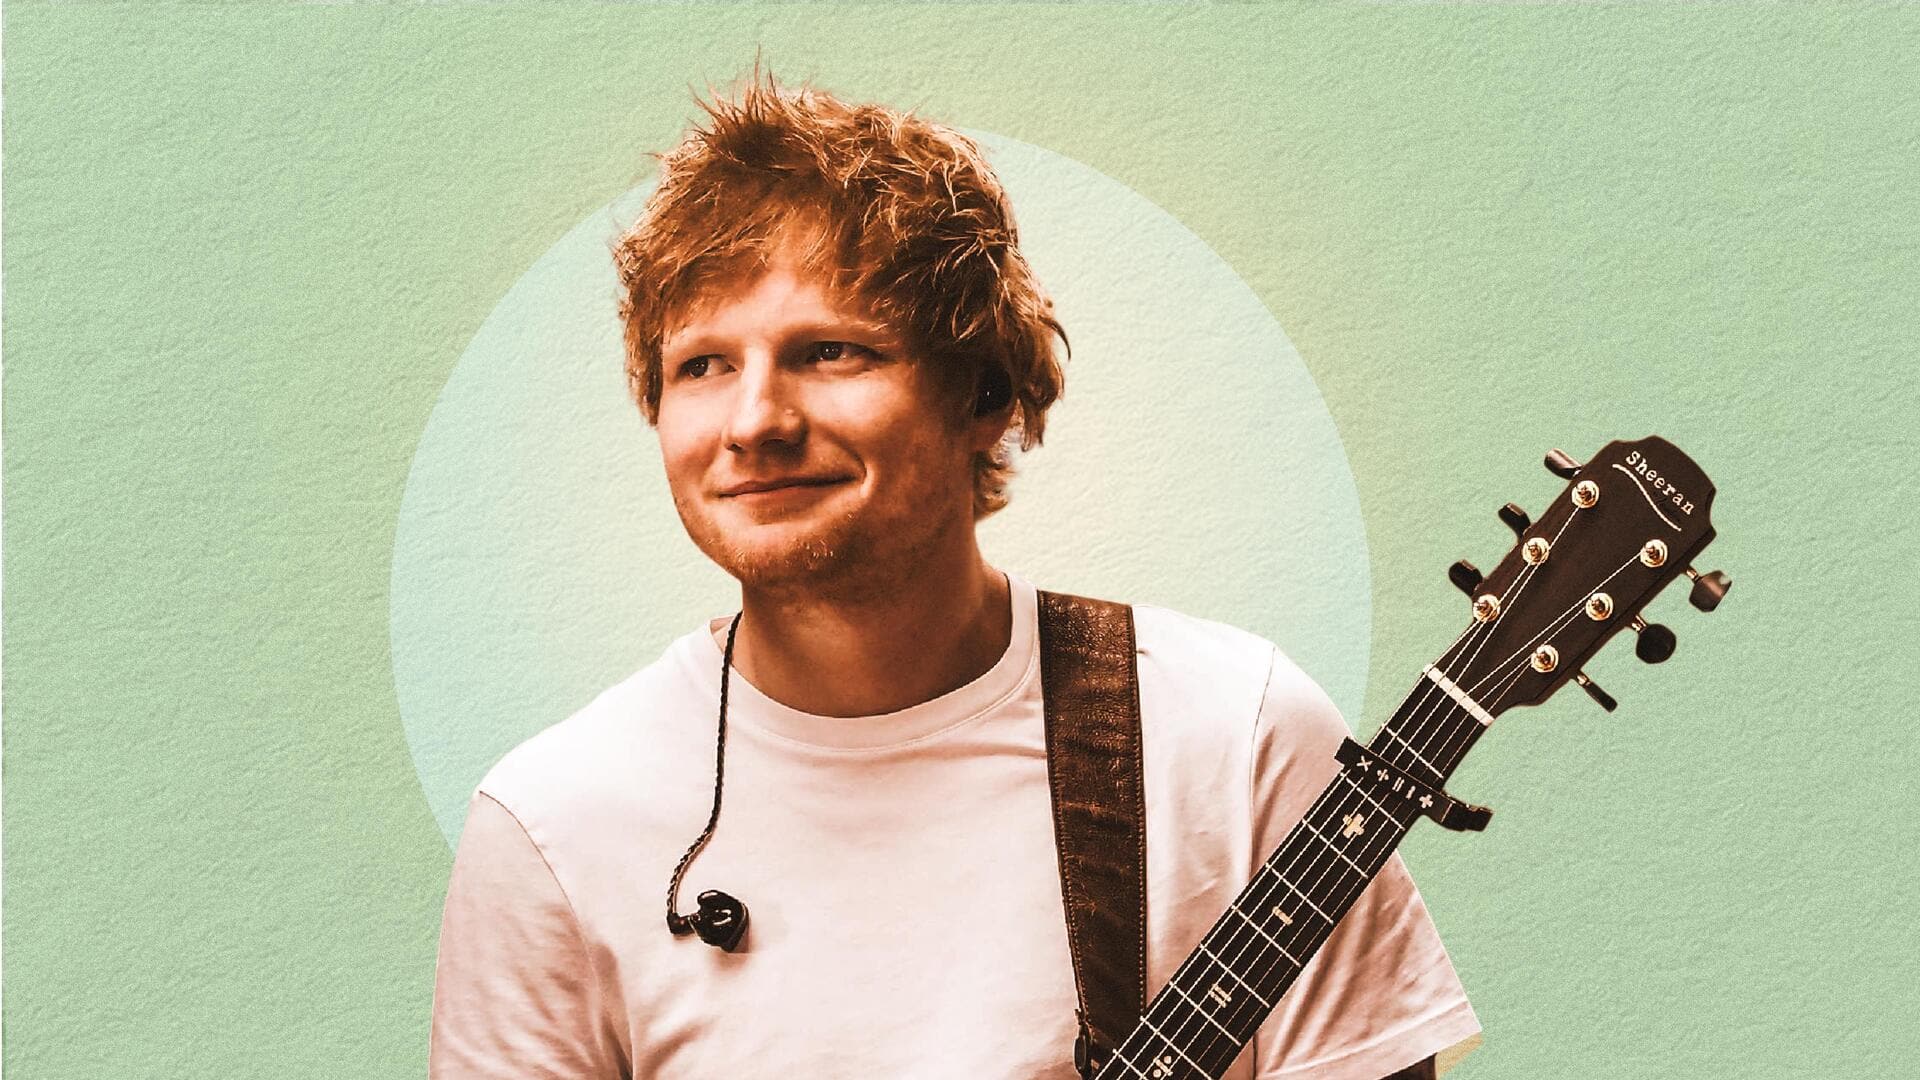 'Photograph' to 'Perfect': Ed Sheeran songs you must listen to